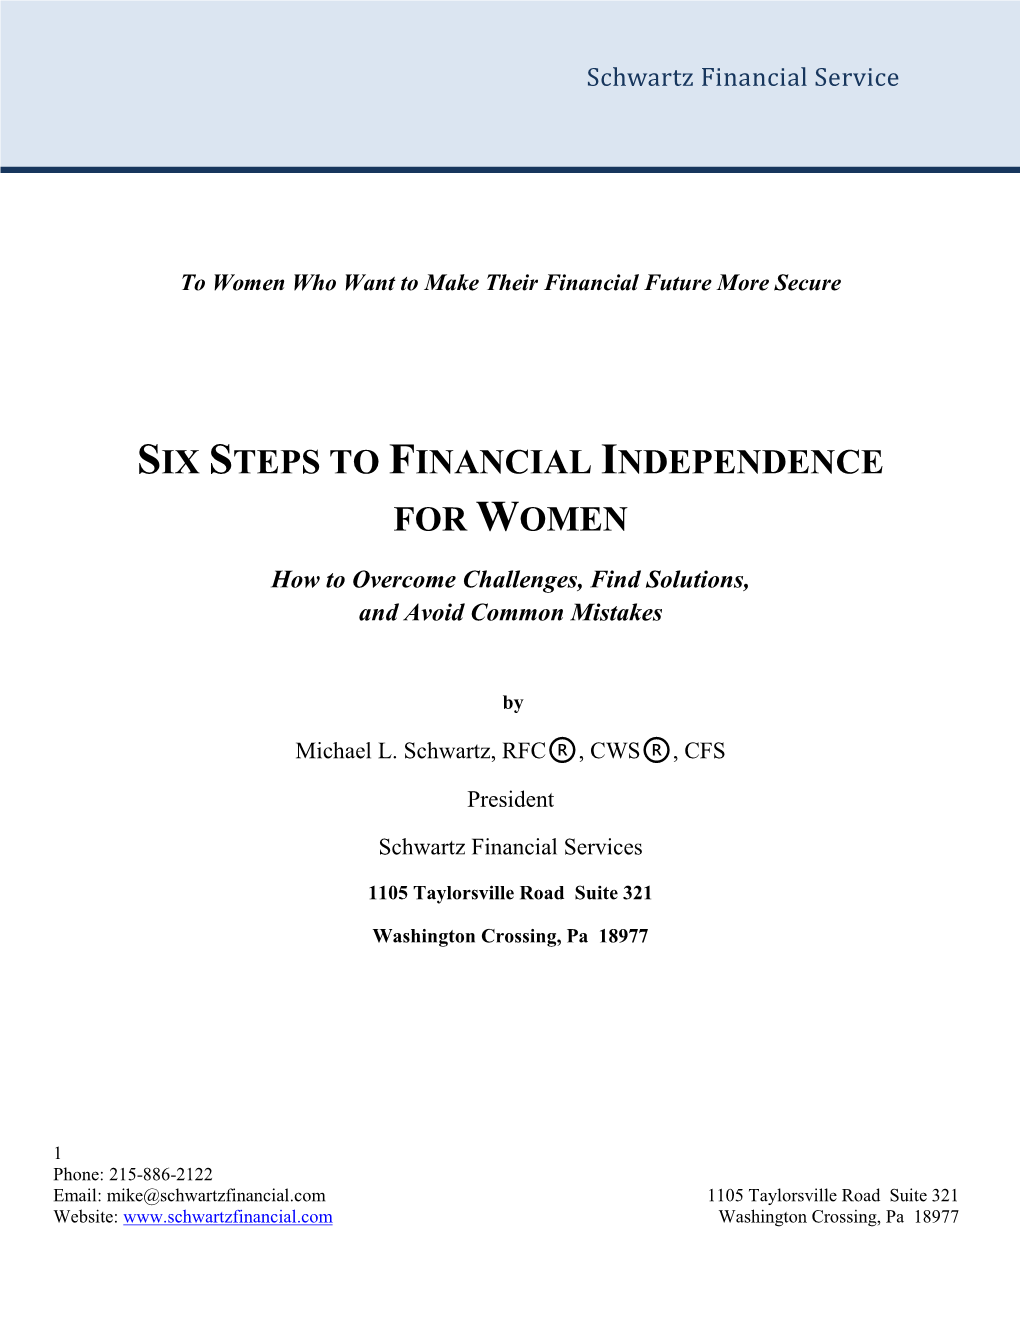 Financial Independence for Women